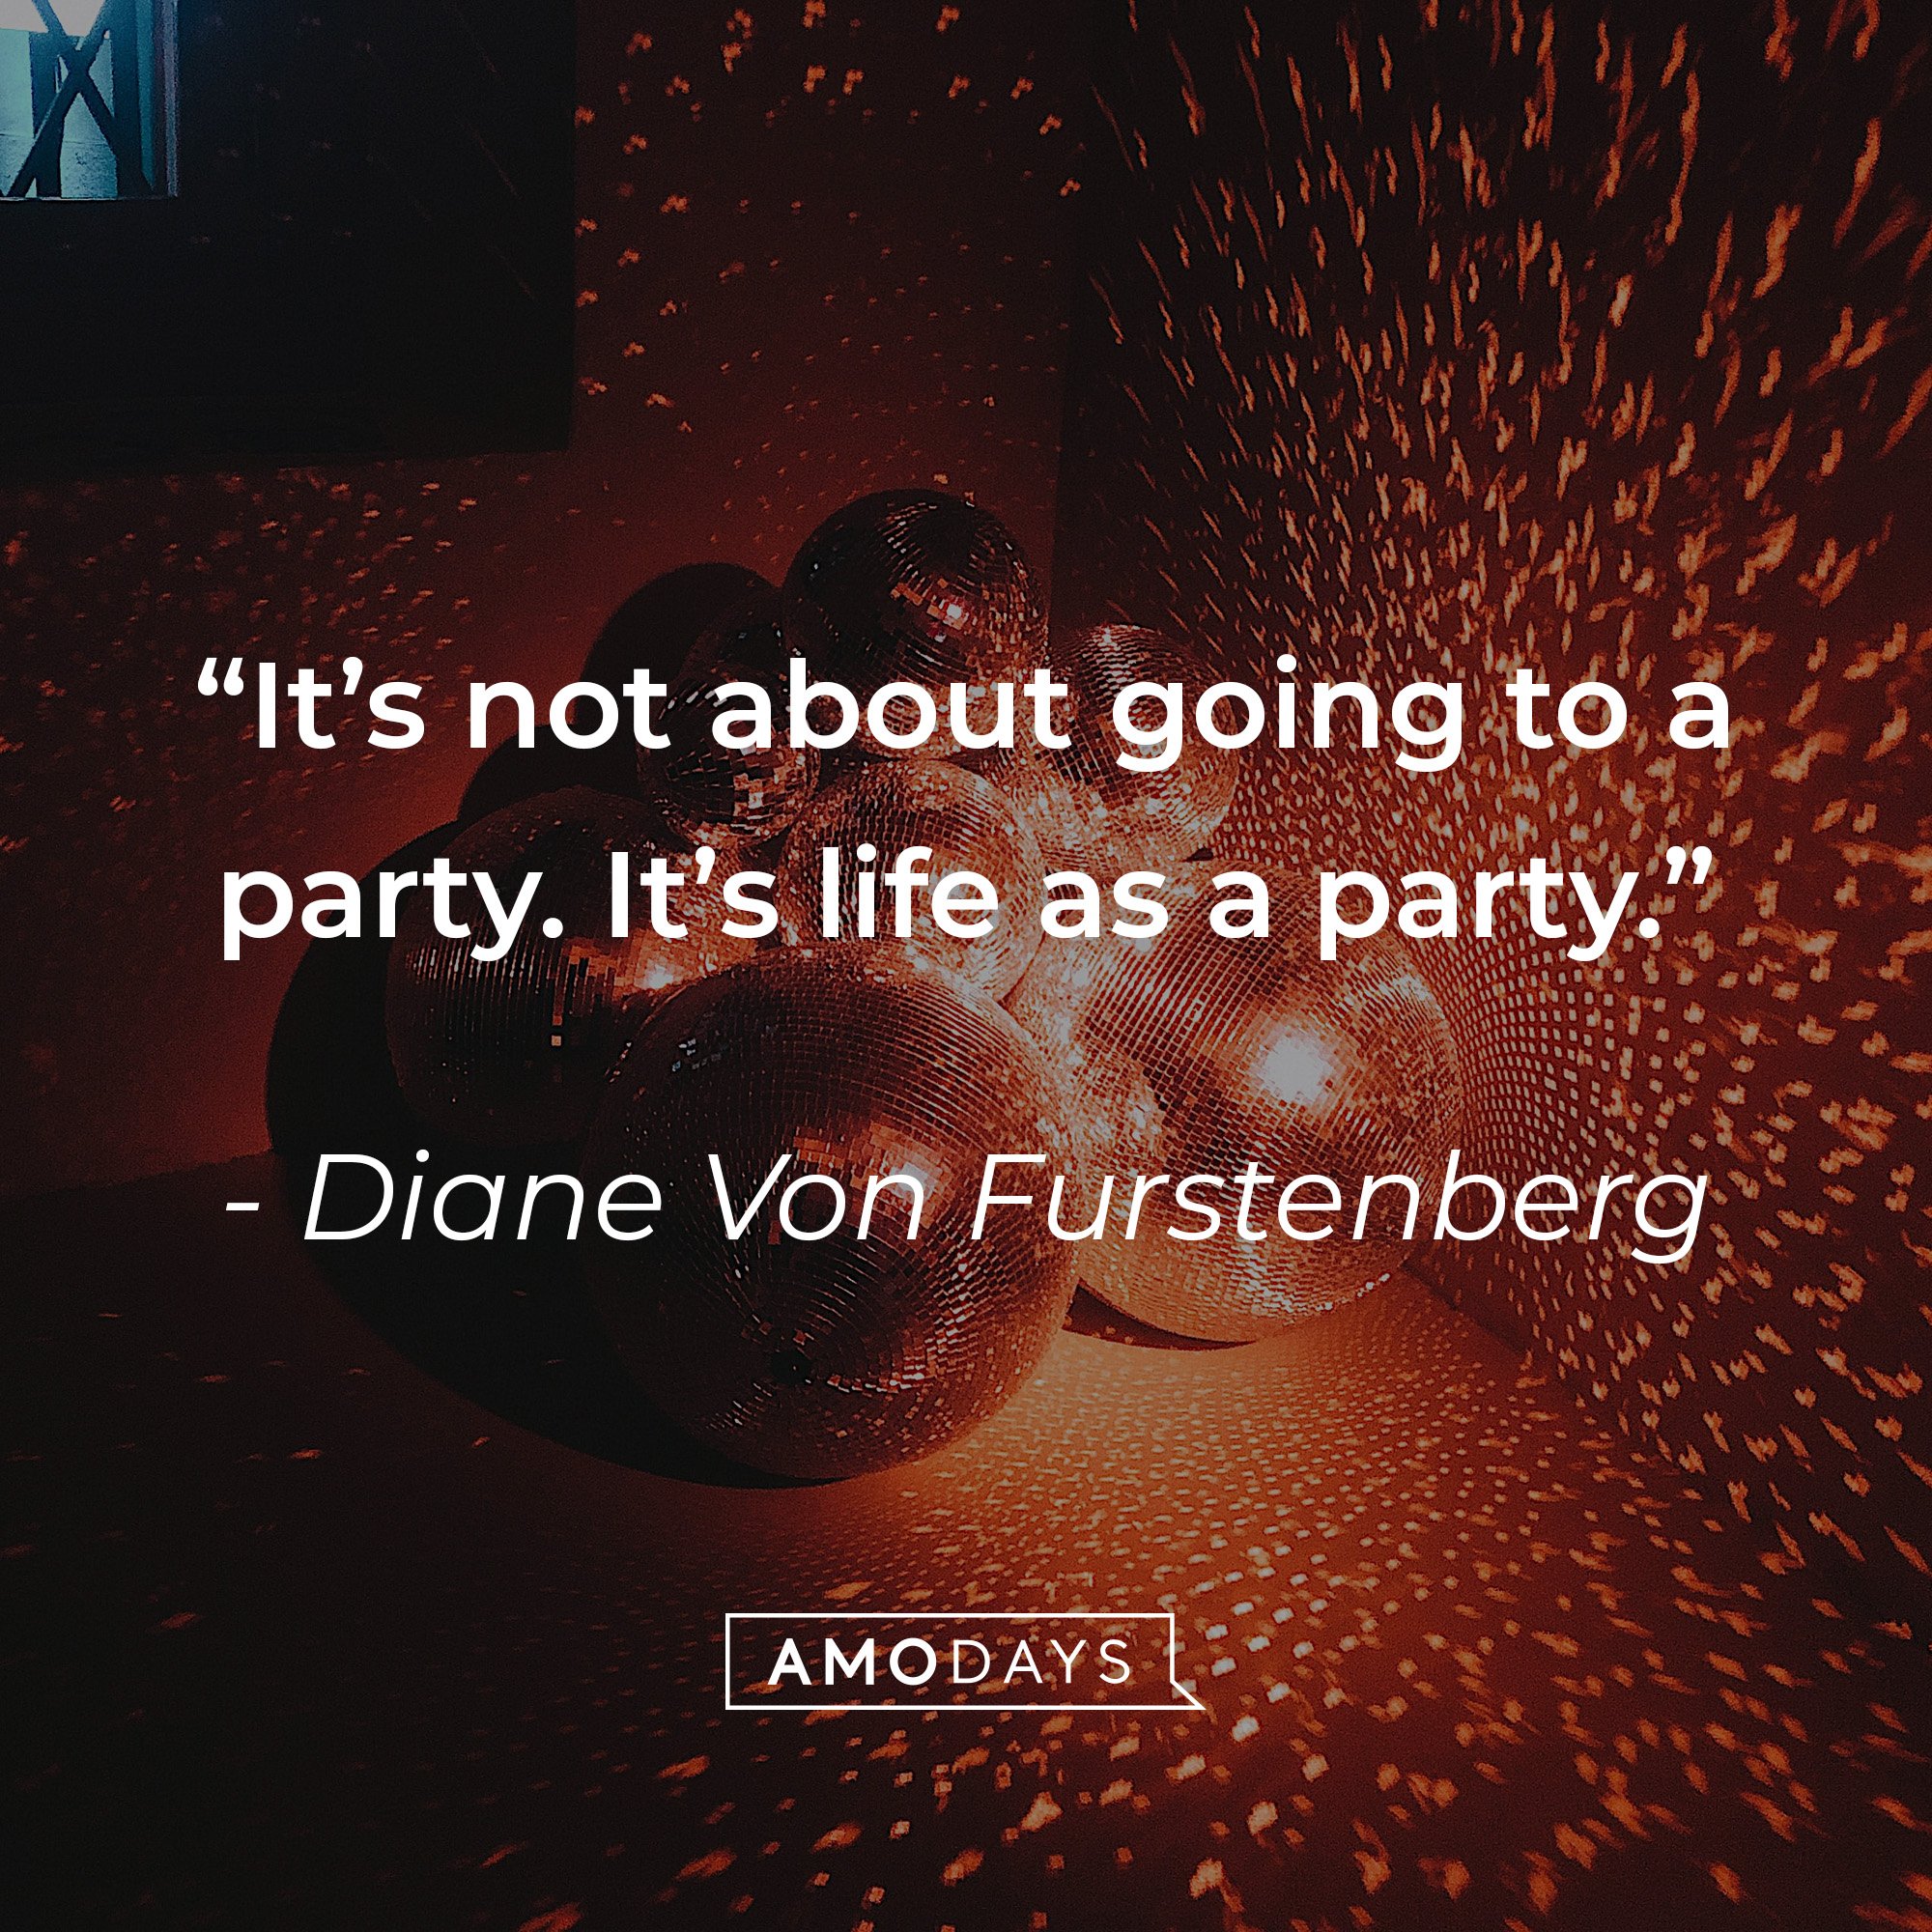 Diane Von Furstenburg's quote: "It's not about going to a party. It's life as a party" | Image: AmoDays